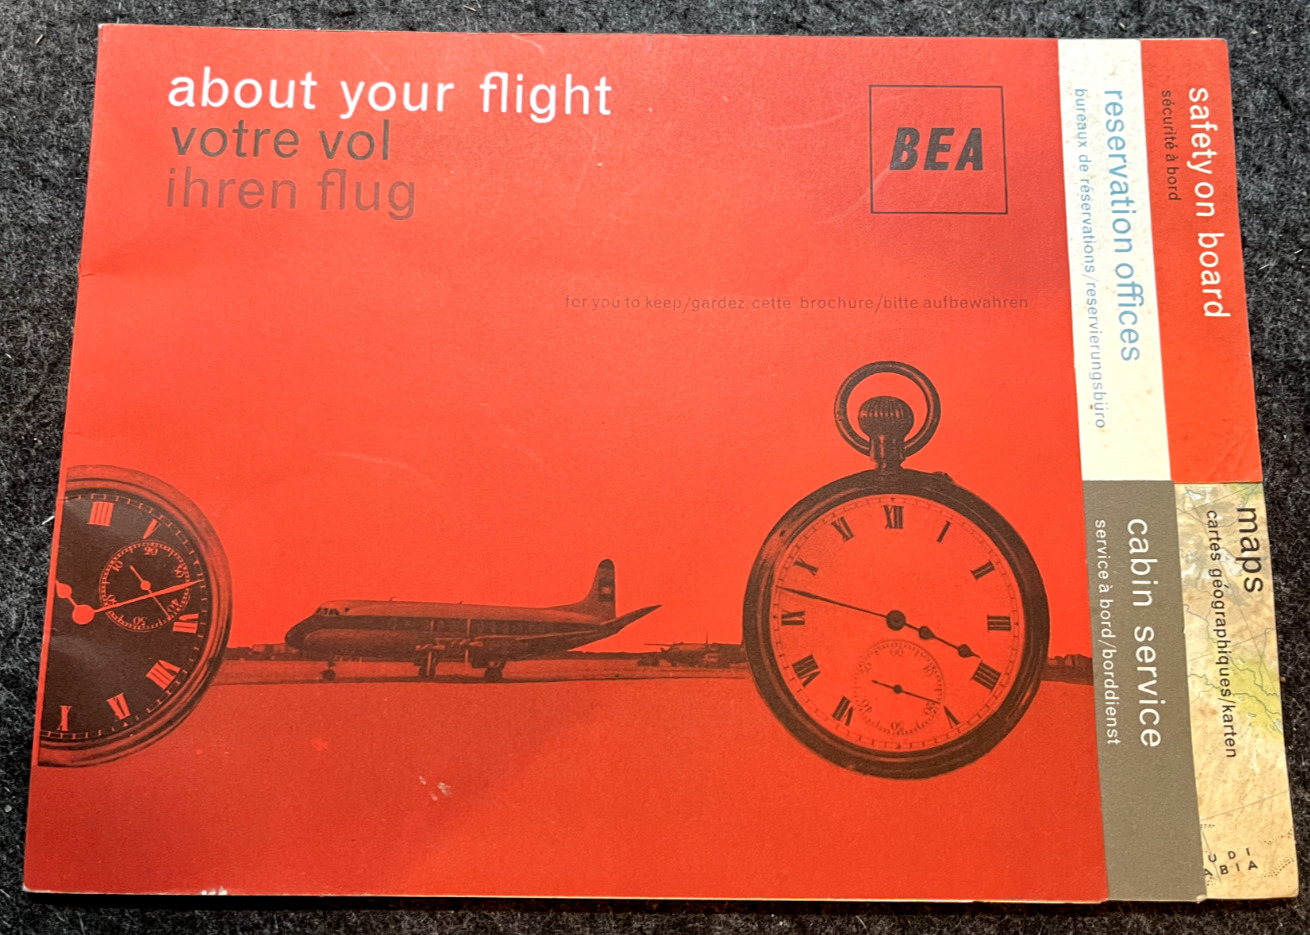 VINTAGE BEA AIRWAYS ABOUT YOUR FLIGHT BROCHURE VGC FOR AGE